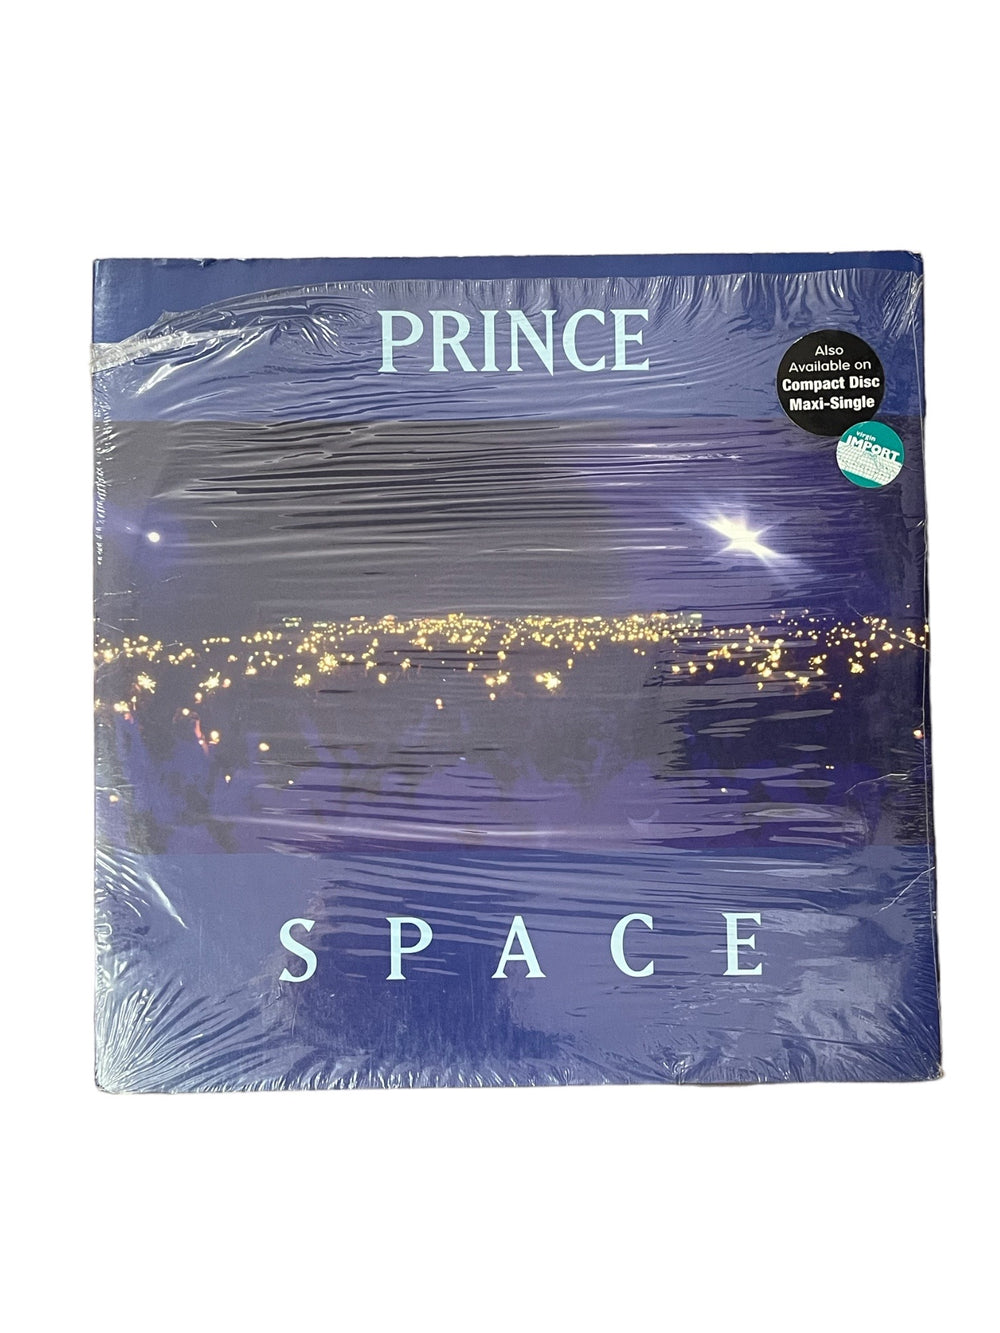 Prince – SPACE 12 INCH VINYL USA  PICTURE SLEEVE SEALED TO 3 SIDES